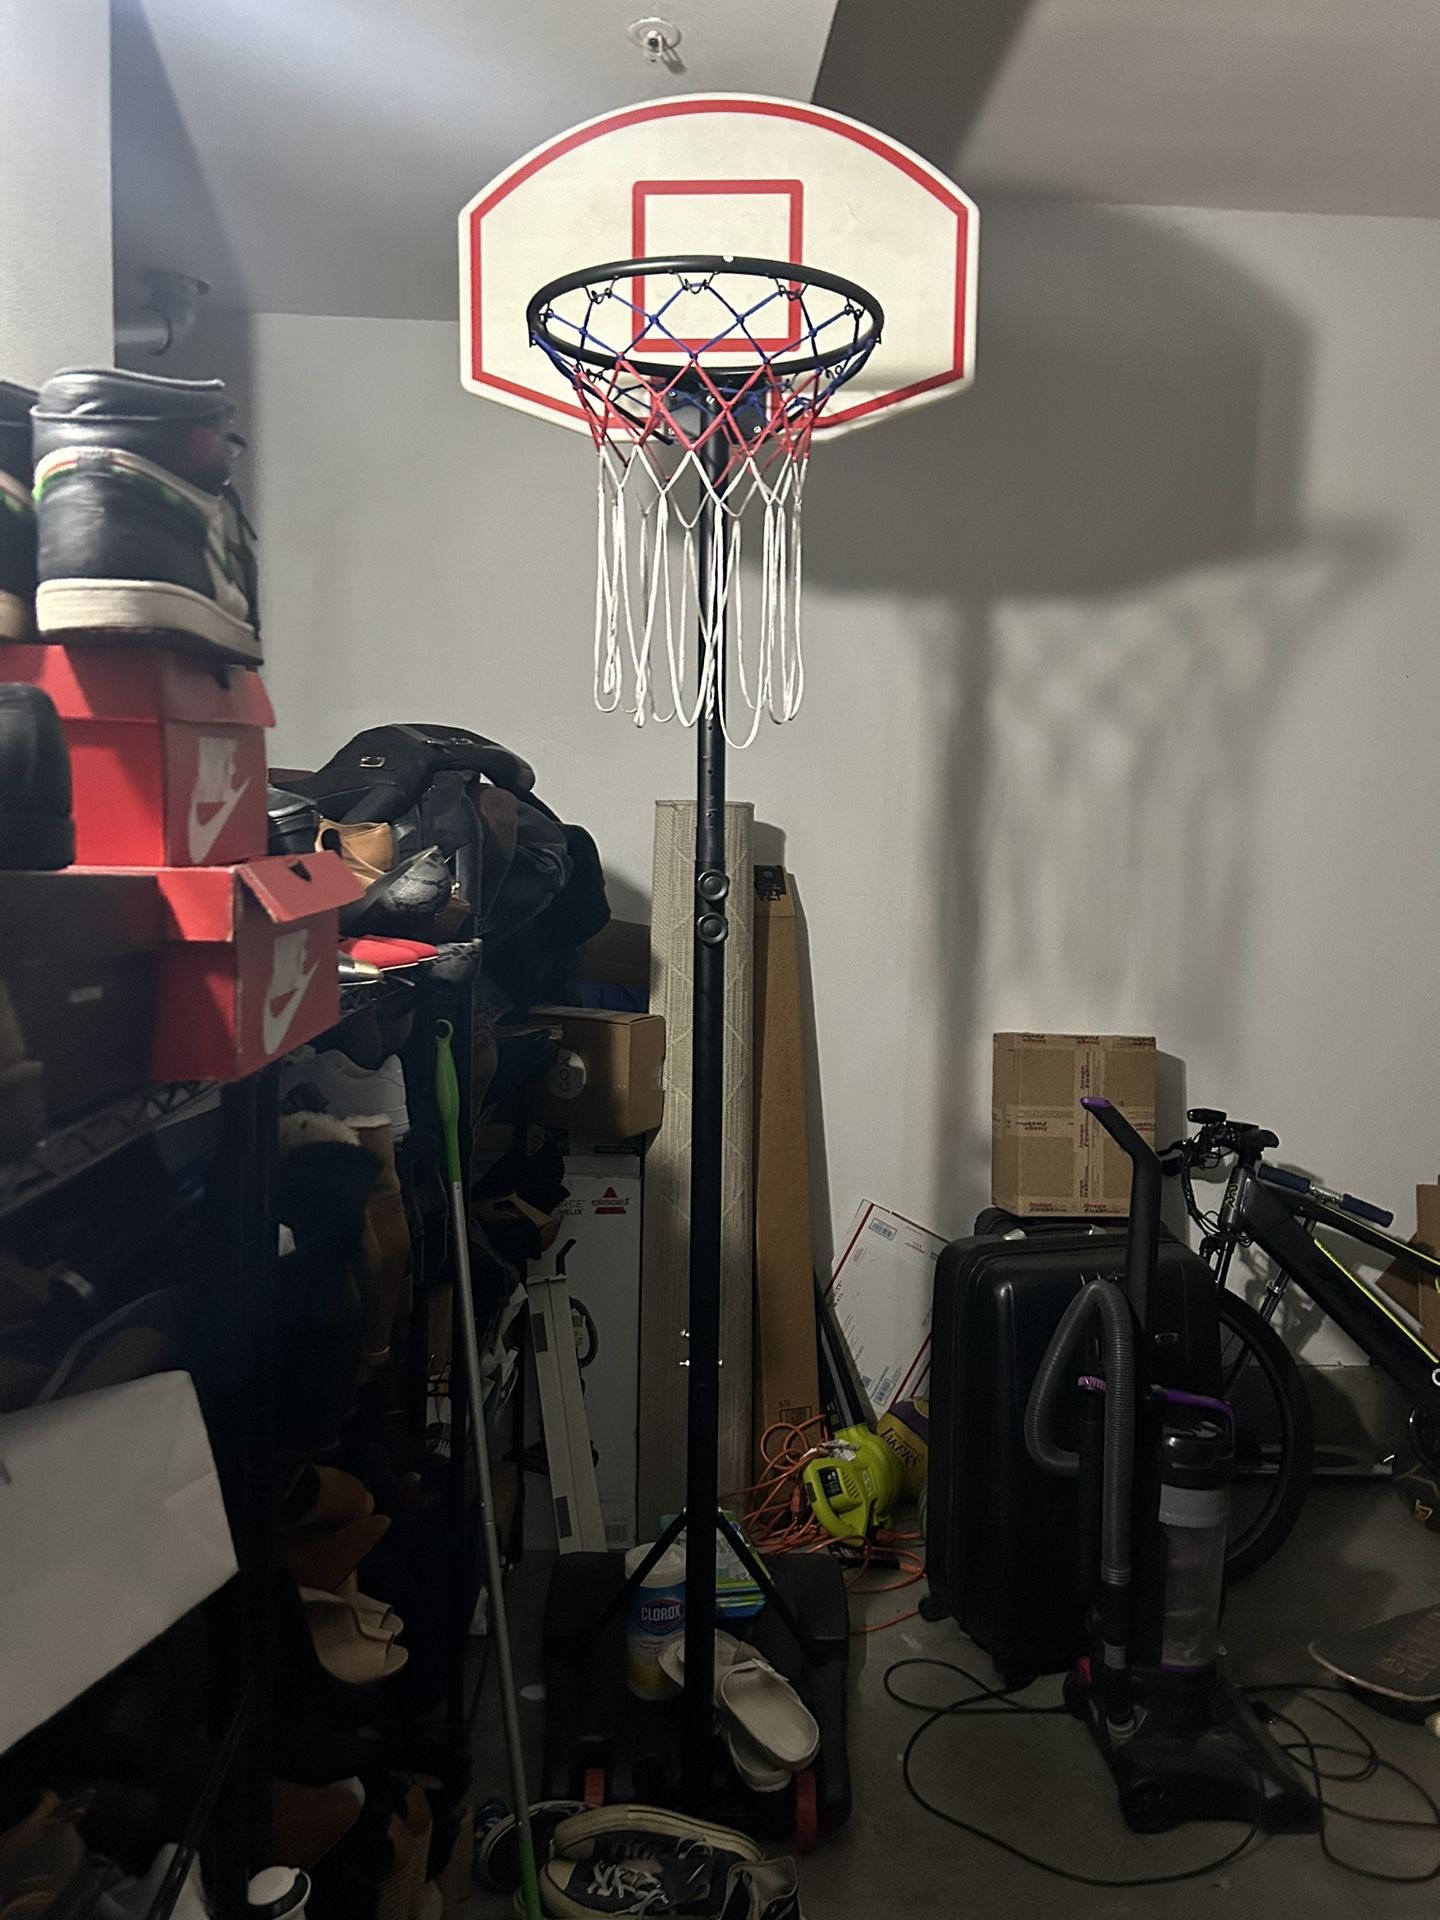 Portable And Adjusting Height Basketball Hoop For Indoor/outdoor